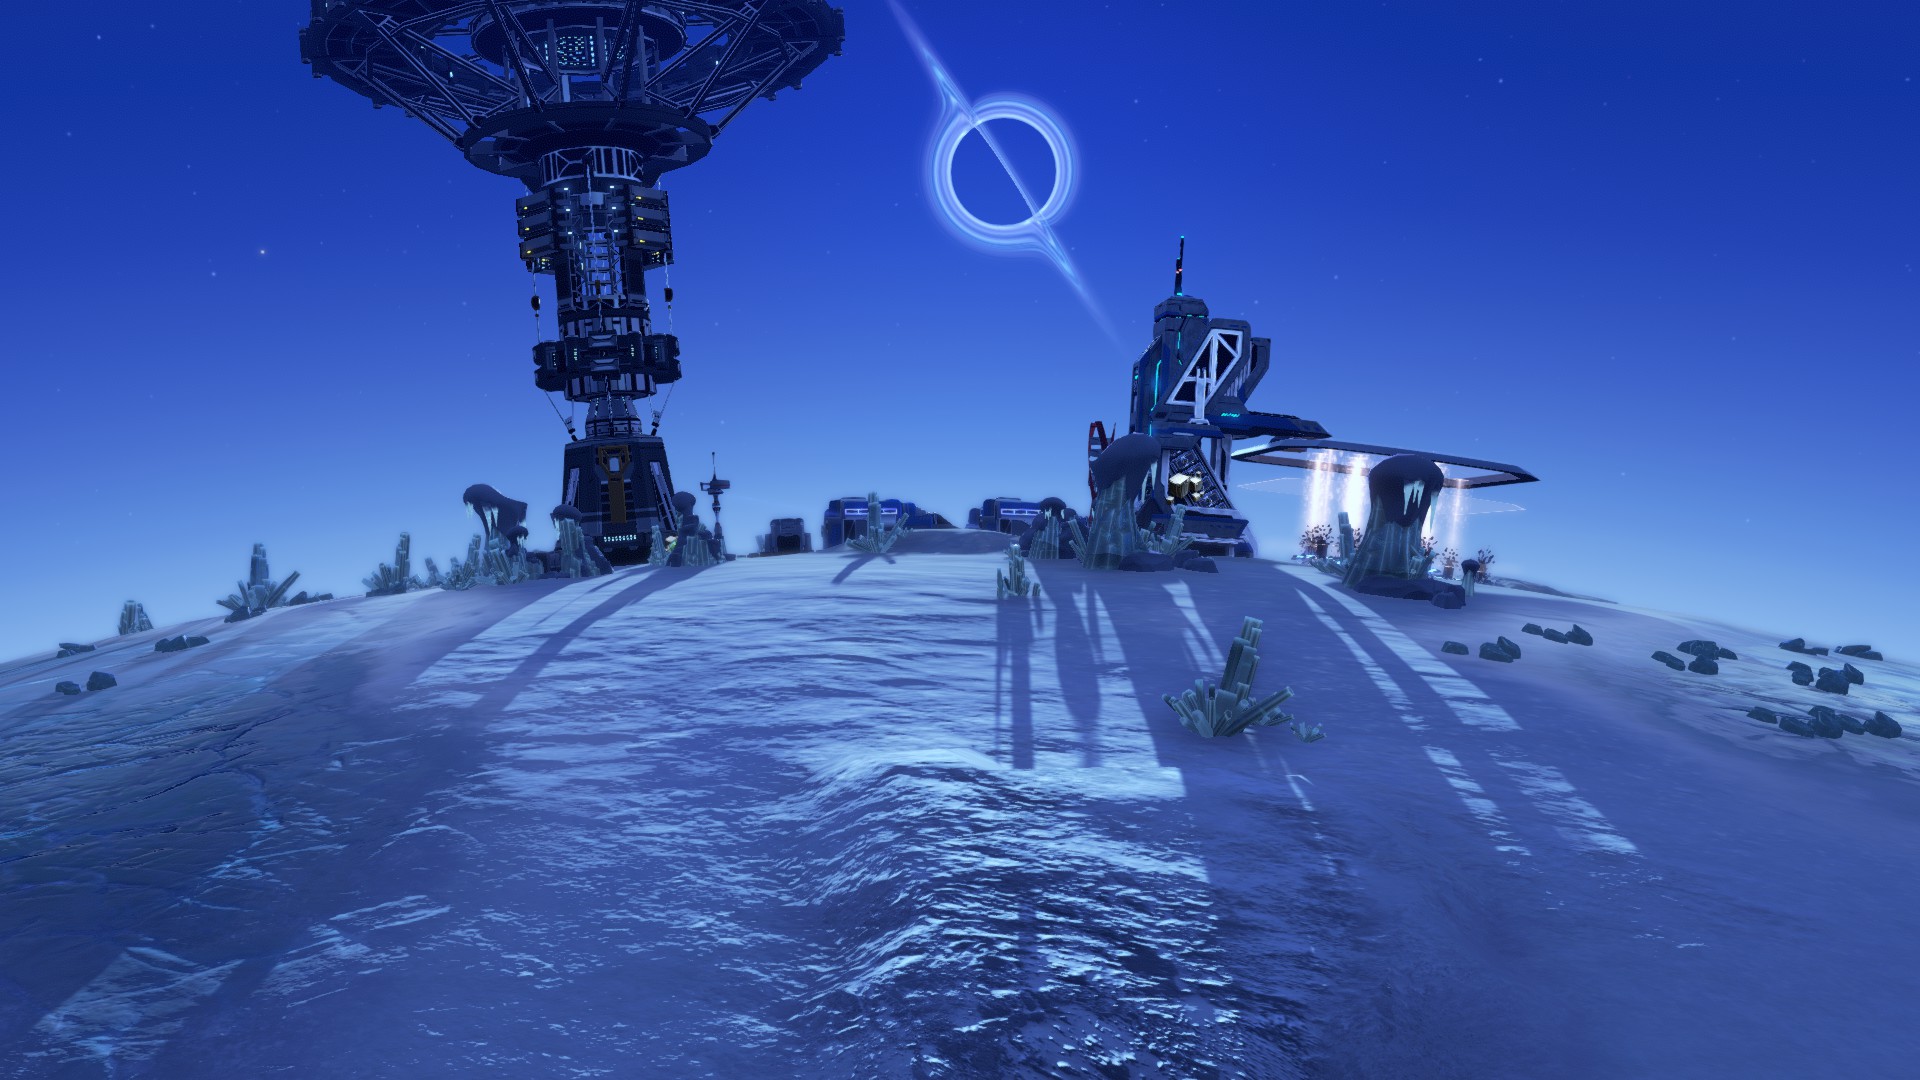 Dyson Sphere Program screenshot showing a small mining setup on an icy planet with a black hole in the backgorund